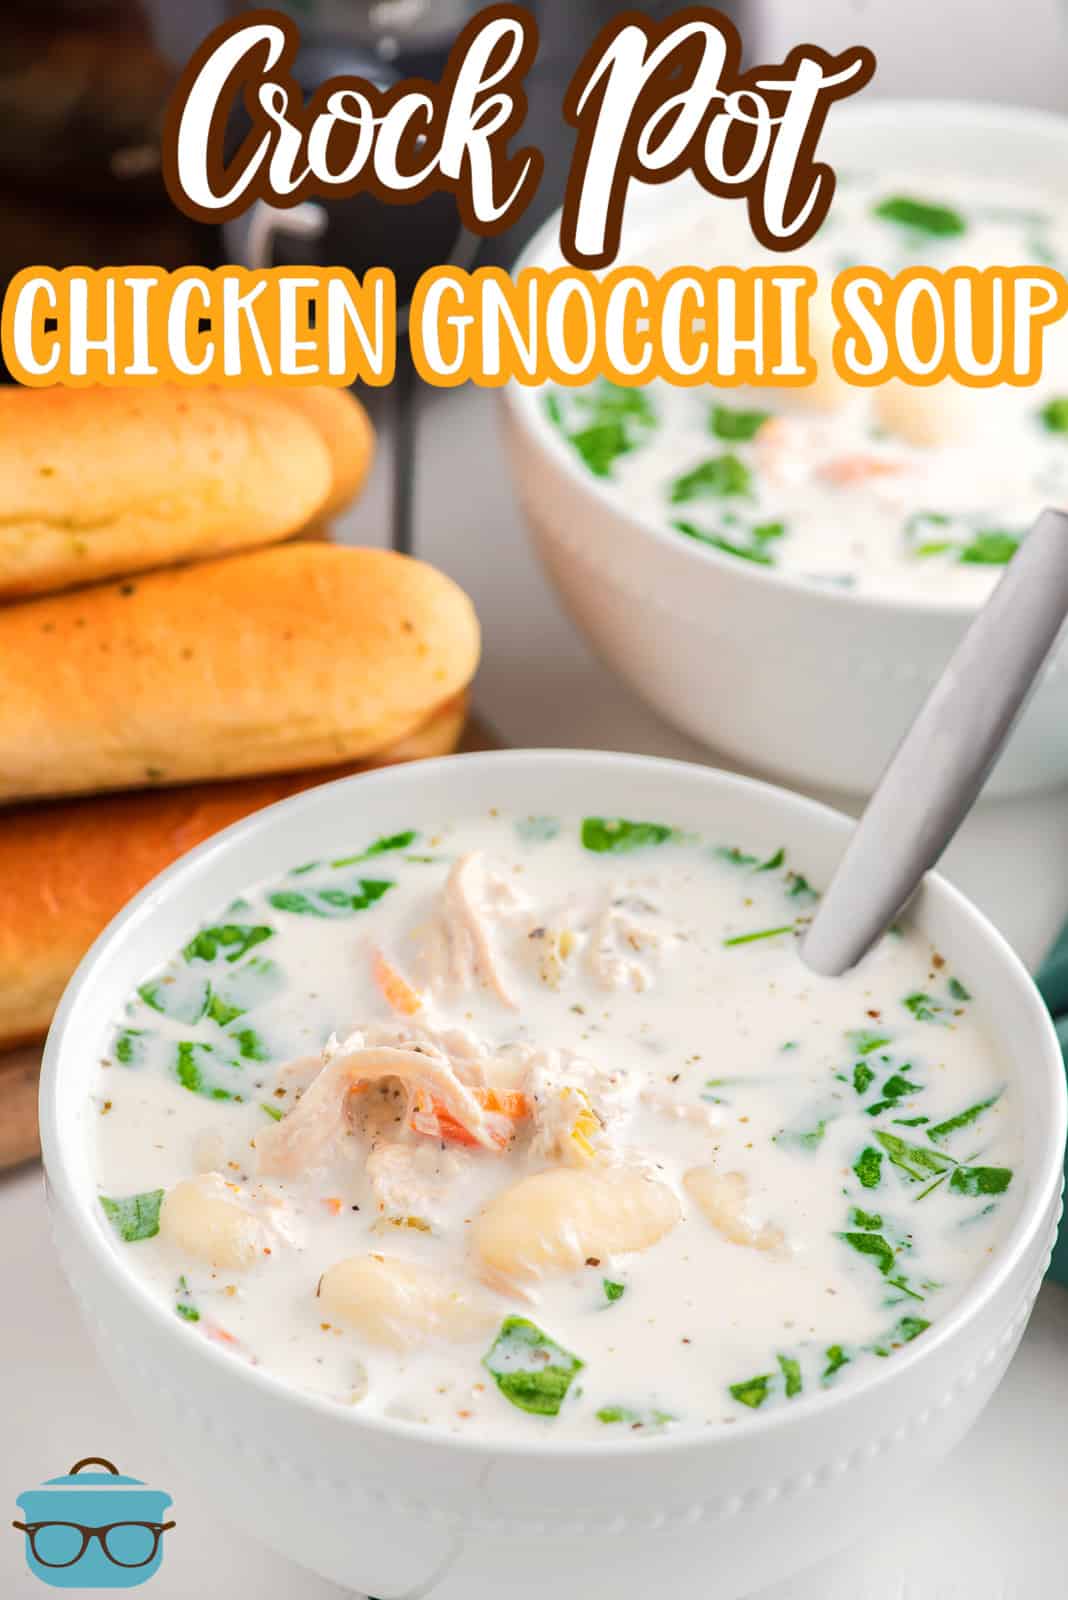 Pinterest image of Crock Pot Olive Garden Chicken Gnocchi Soup in white bowl with spoon and breadsticks behind it.